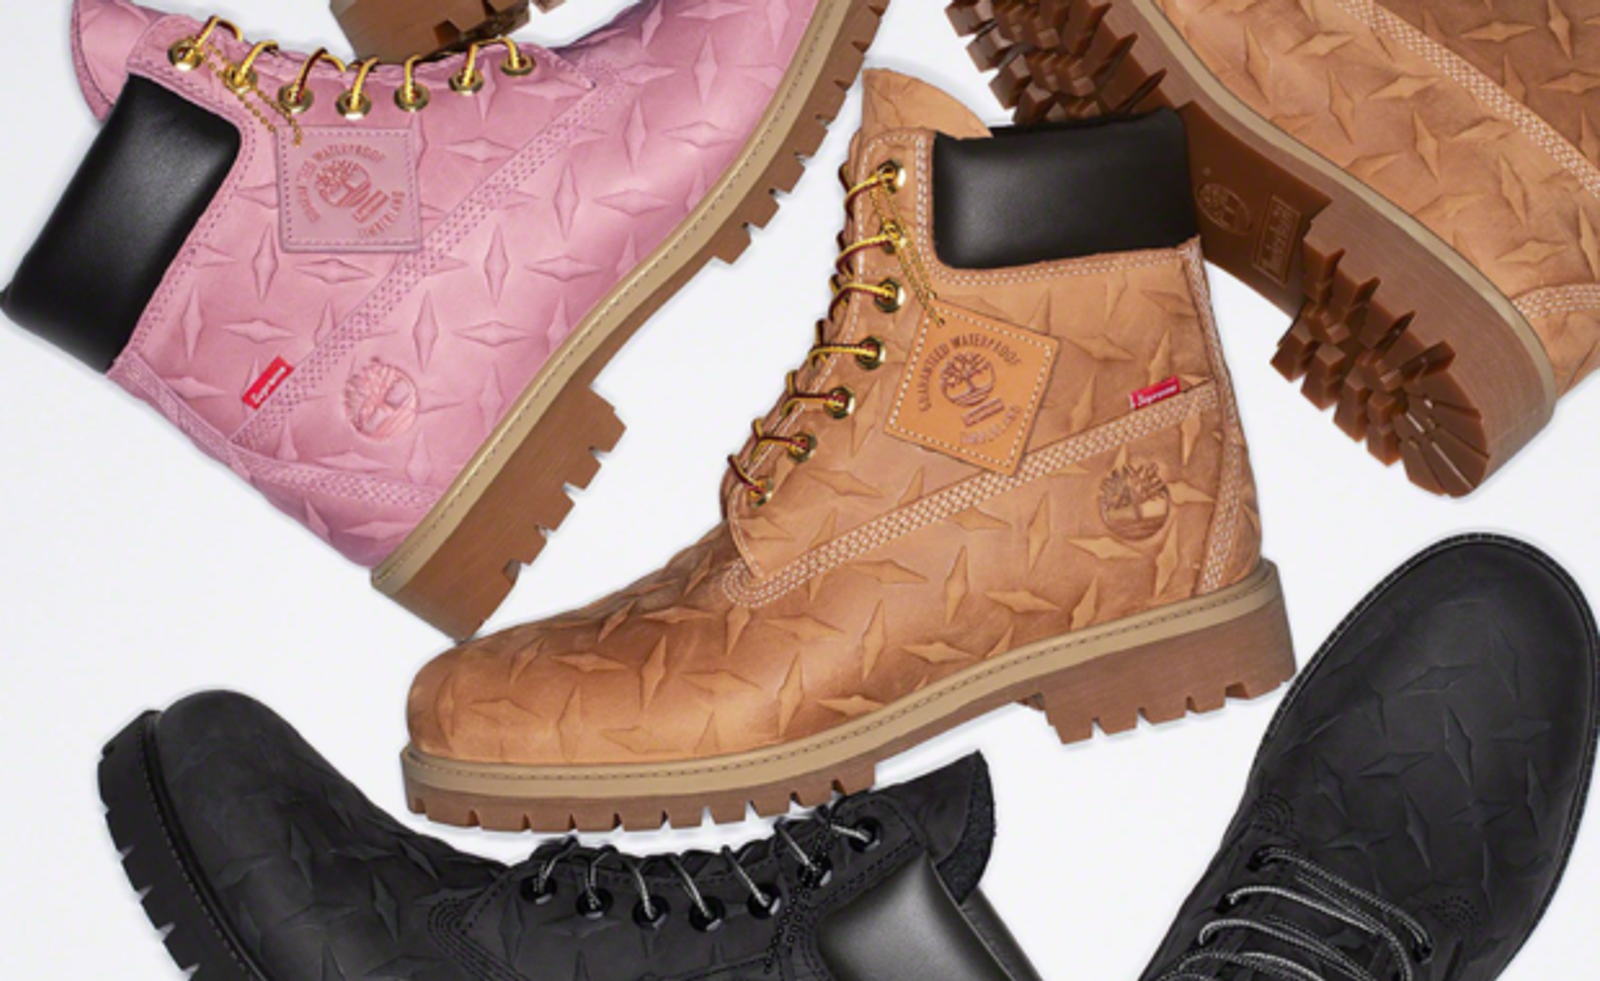 The Supreme x Timberland 6" Waterproof Boot Diamond Plate Collection Releases December 2023